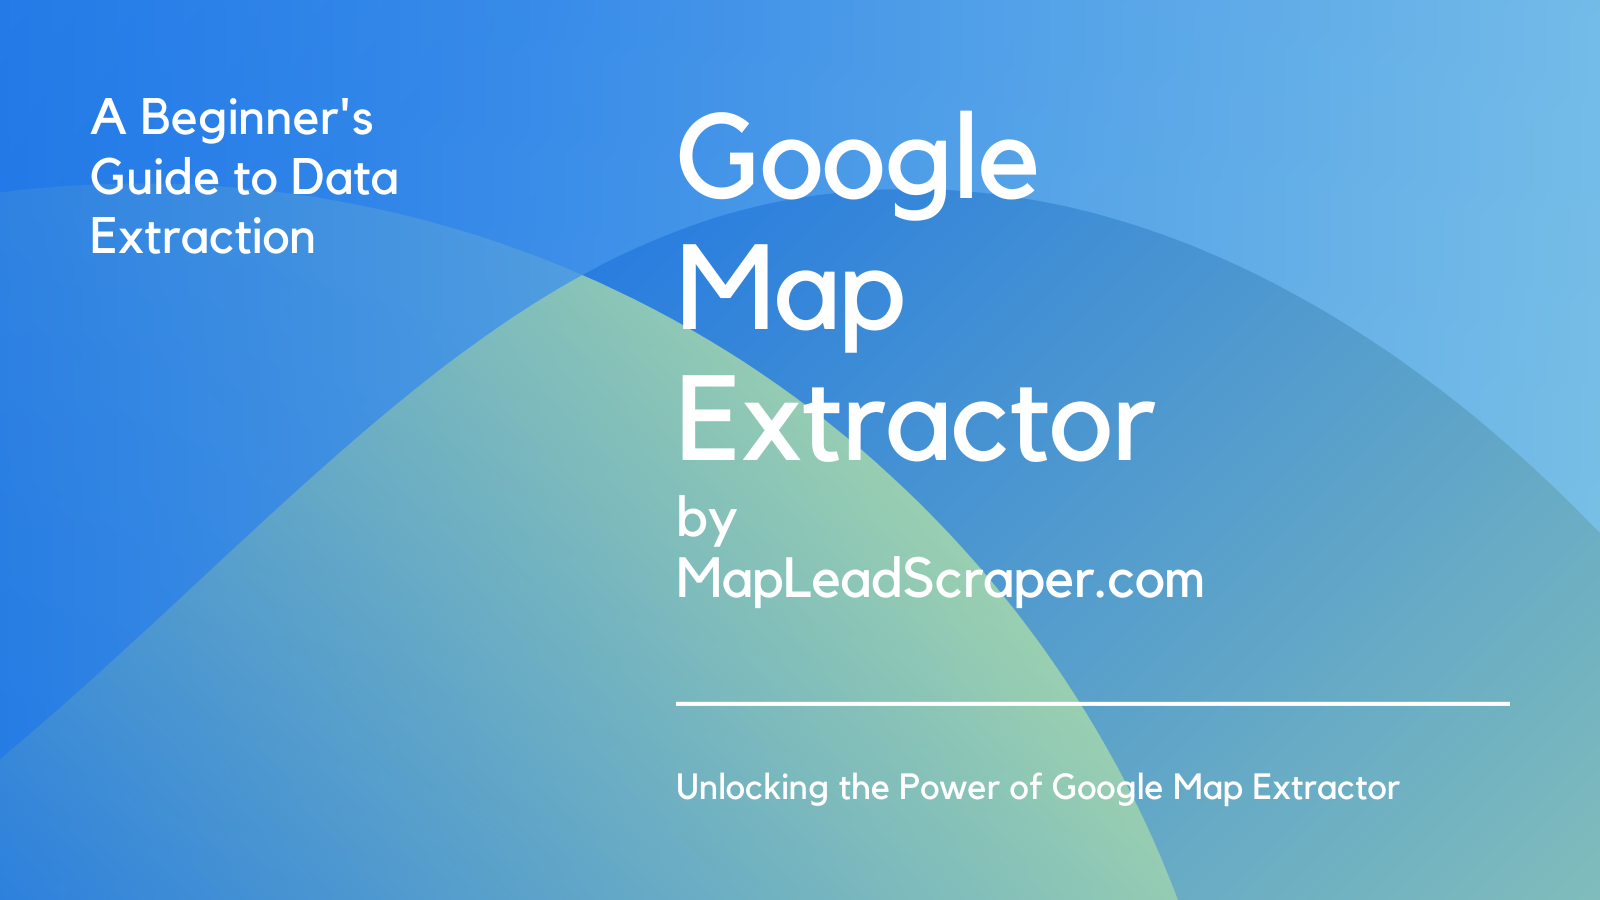 Google Map Extractor: A Beginner's Guide to Data Extraction